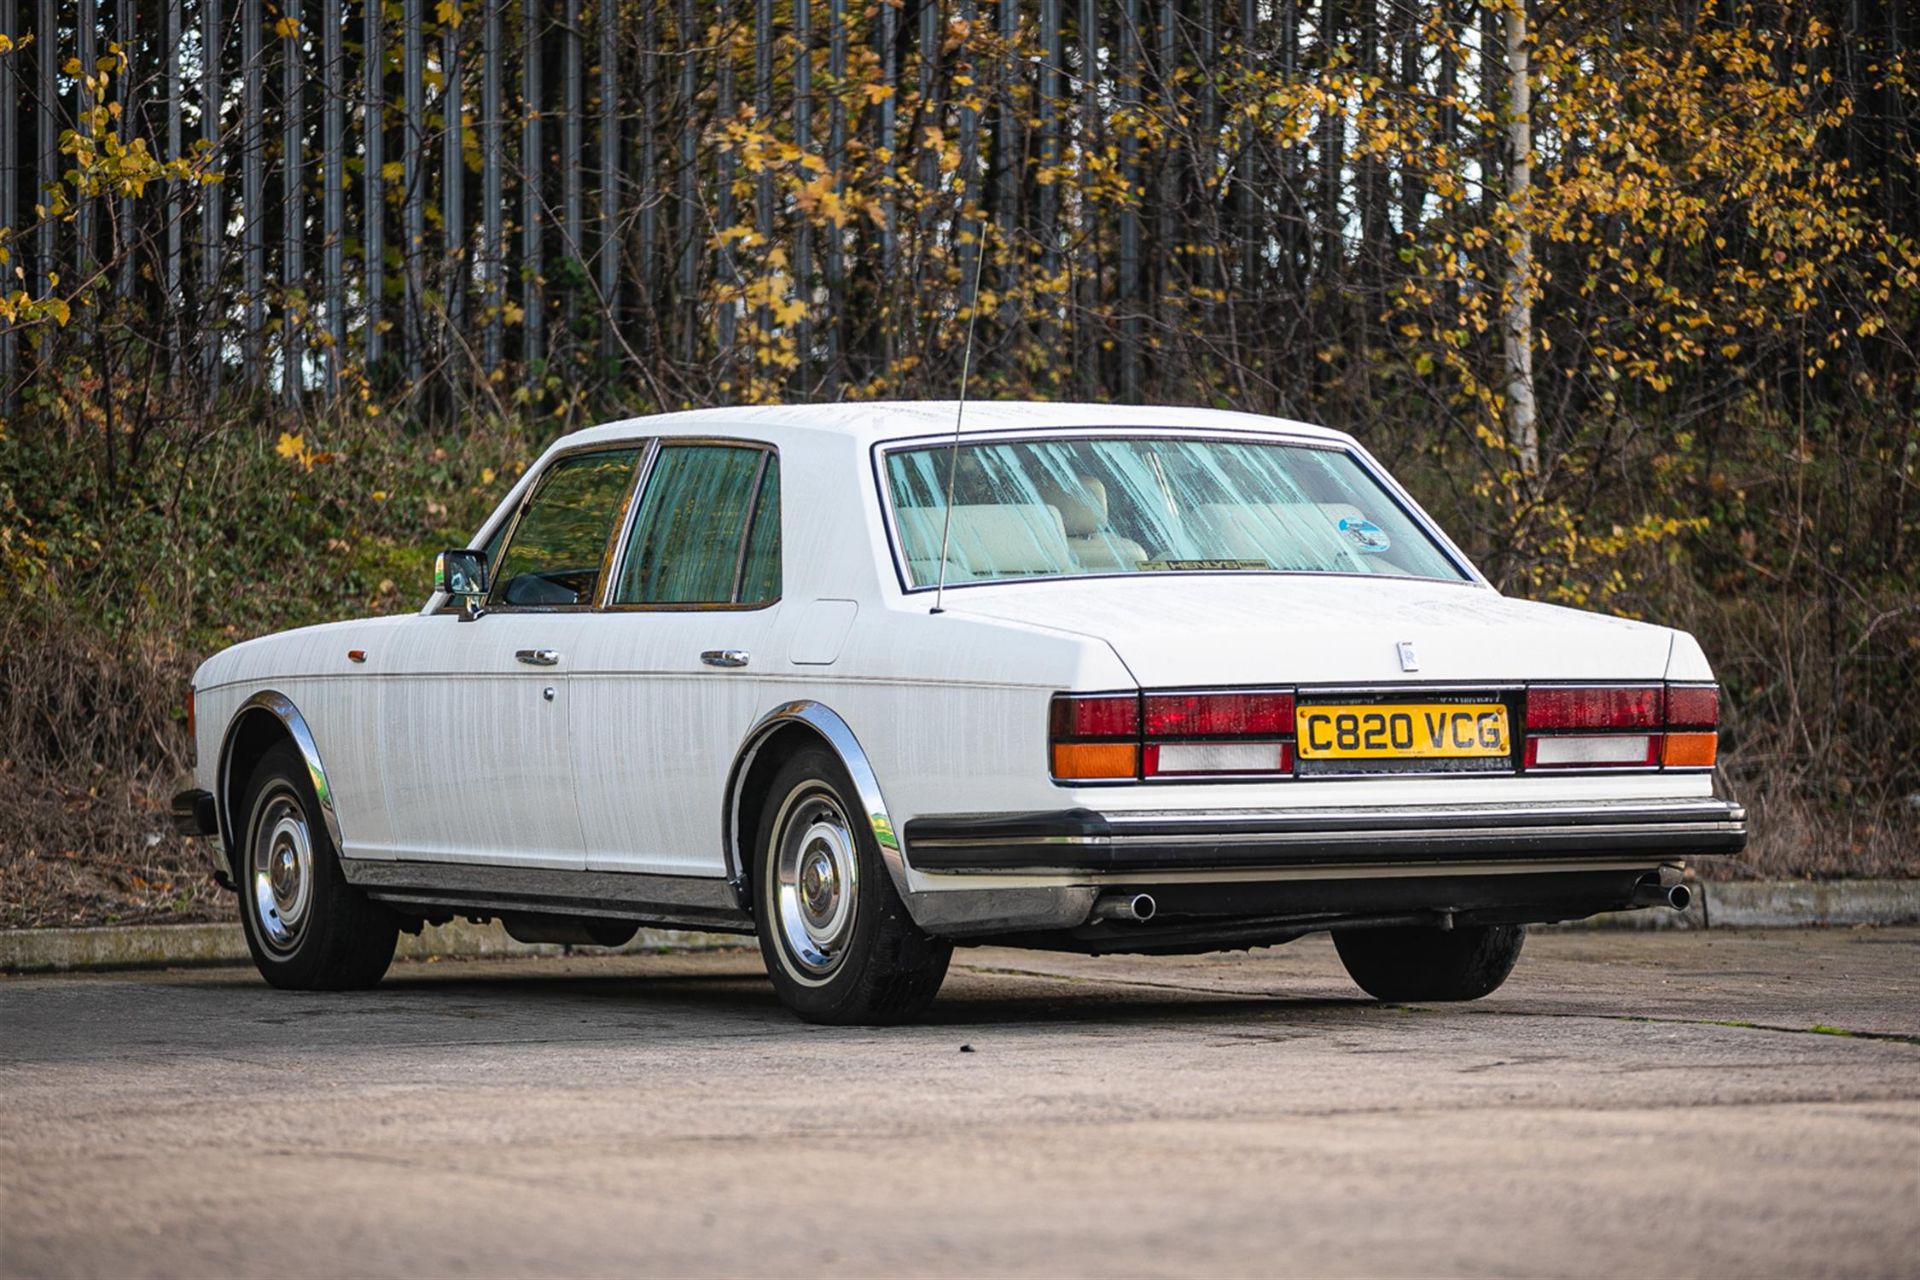 1985 Rolls-Royce Silver Spirit - One Owner - Image 4 of 10